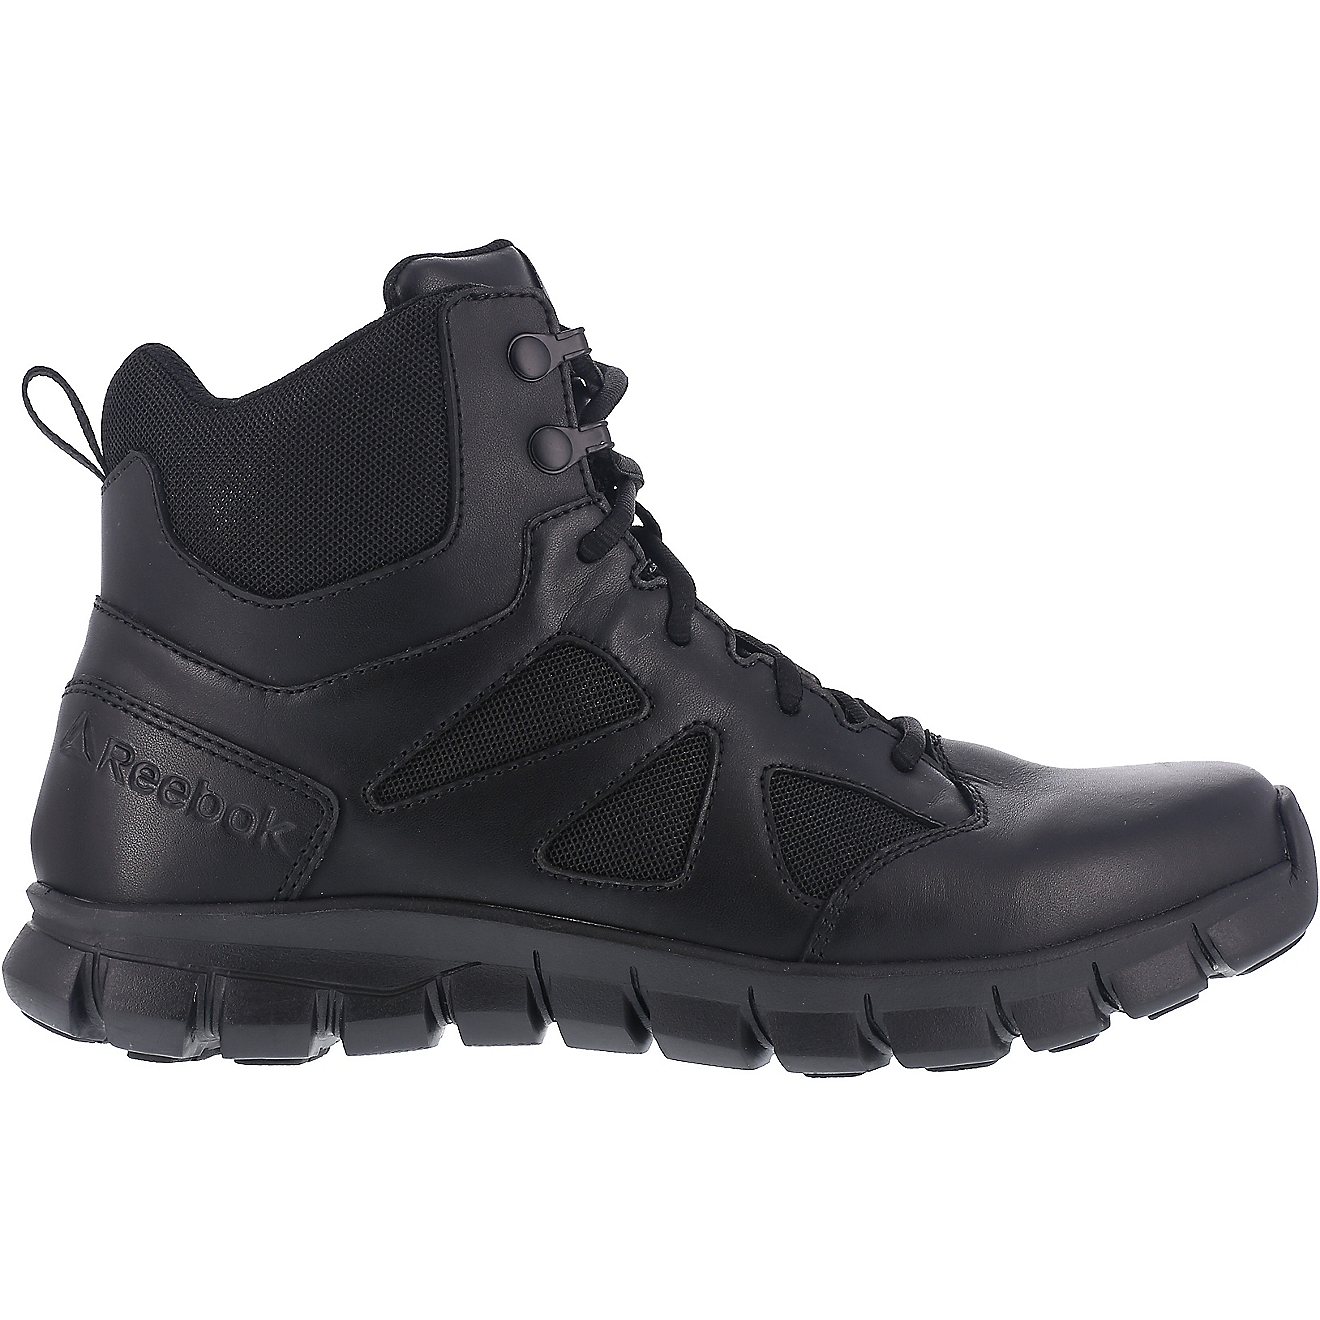 Reebok Men's SubLite Cushion 6 in EH Tactical Boots | Academy